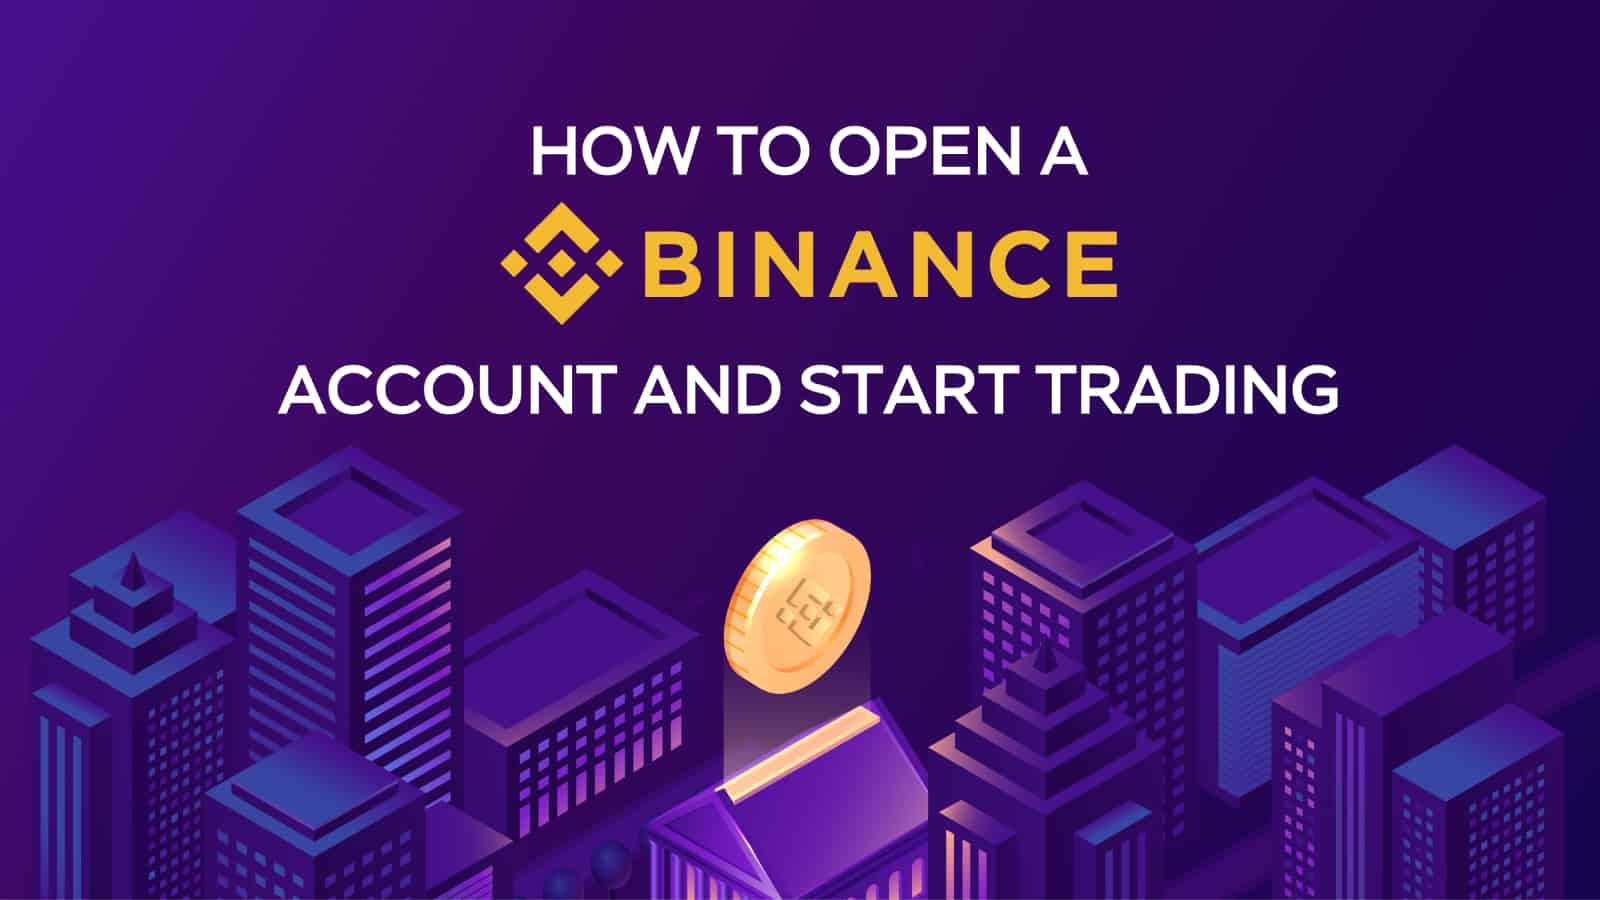 How To Open A Binance Account Featured Image 1